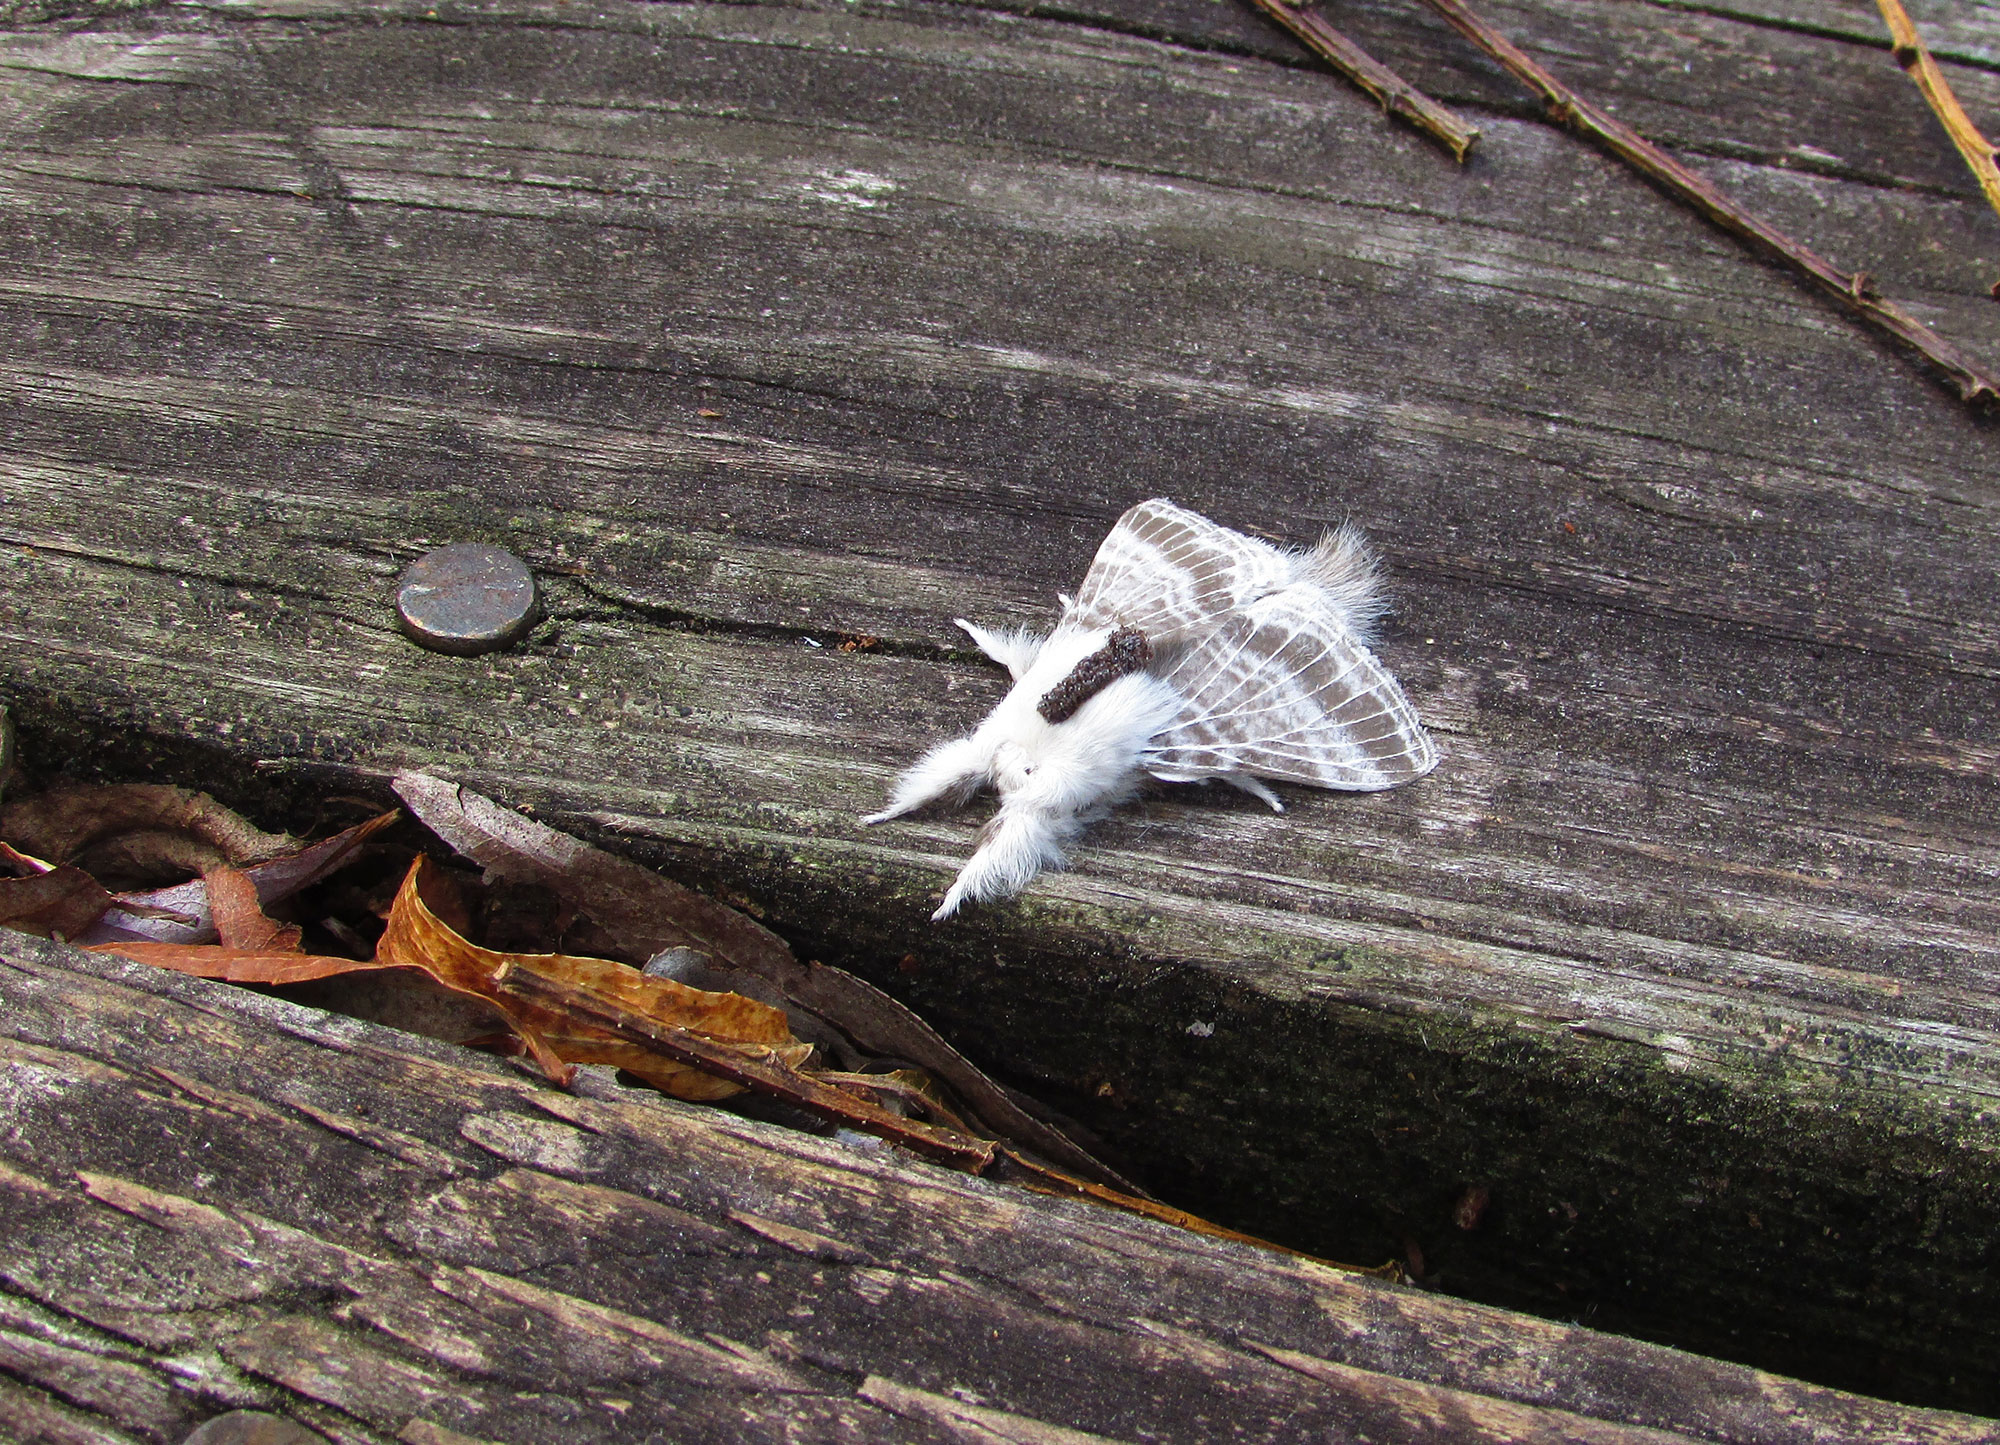 A large tolype moth on a wooden structure.